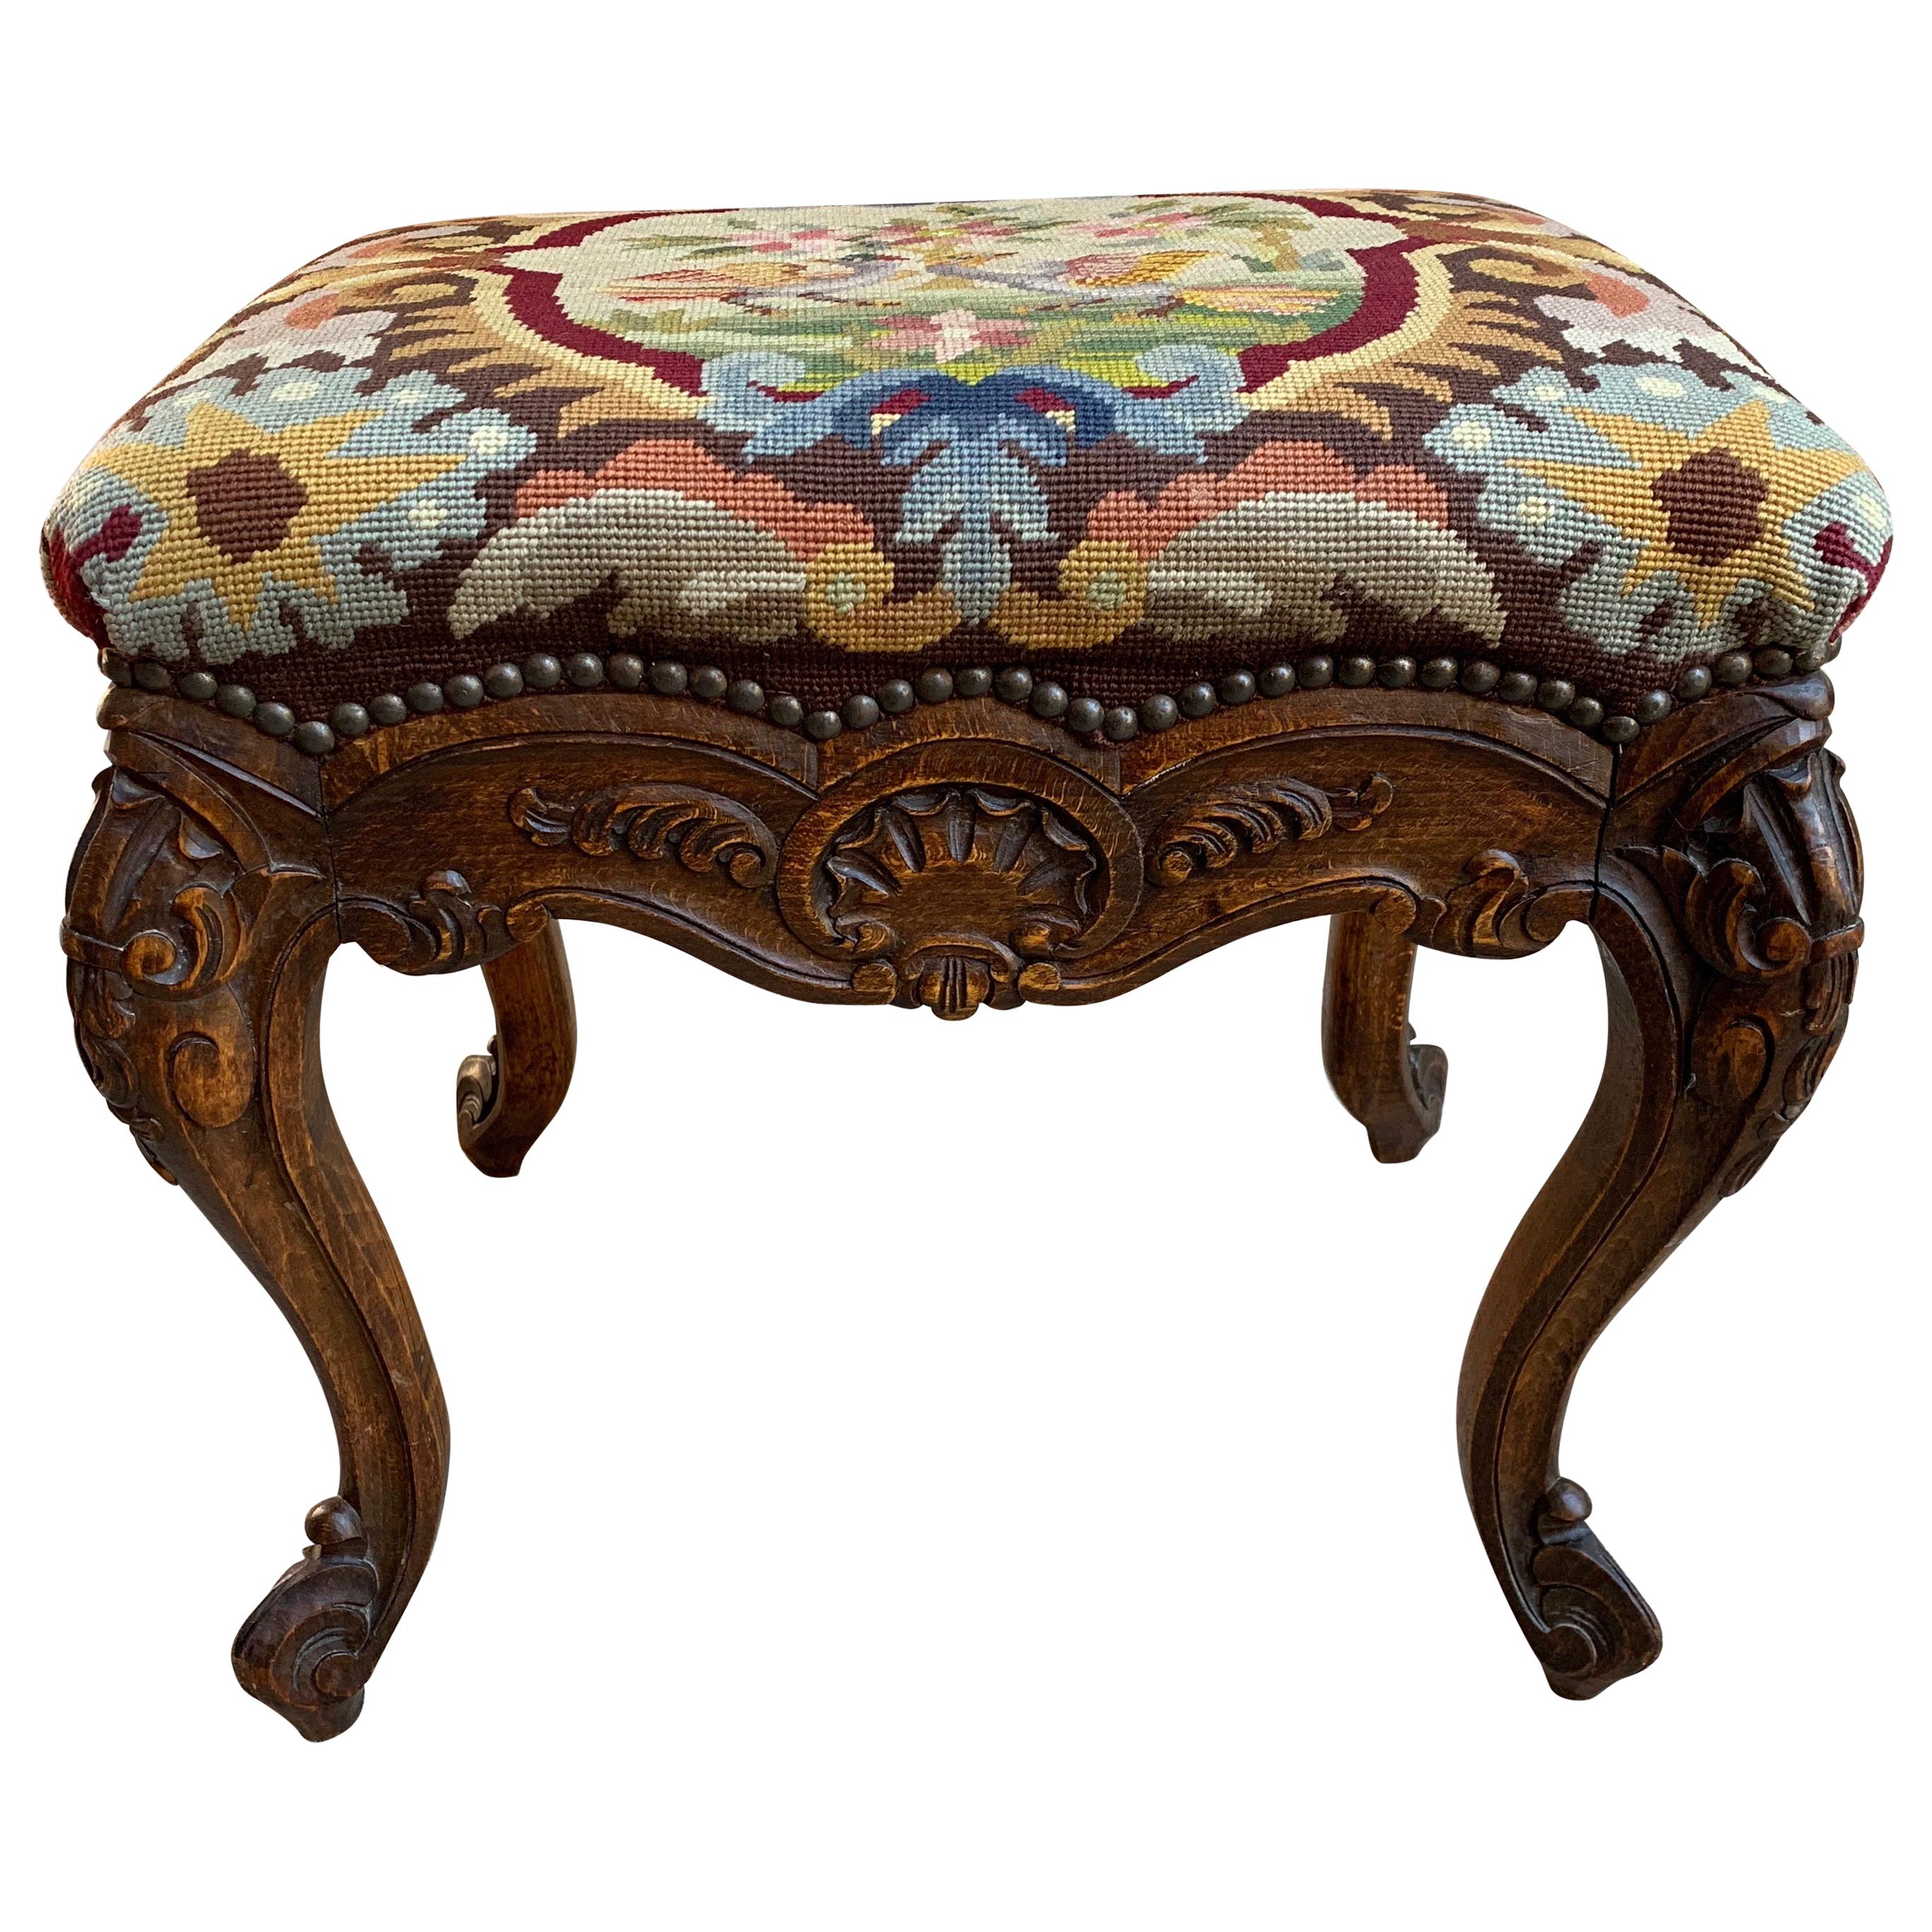 19th Century French Carved Oak Stool Bench Louis XV Style Tabouret Needlepoint